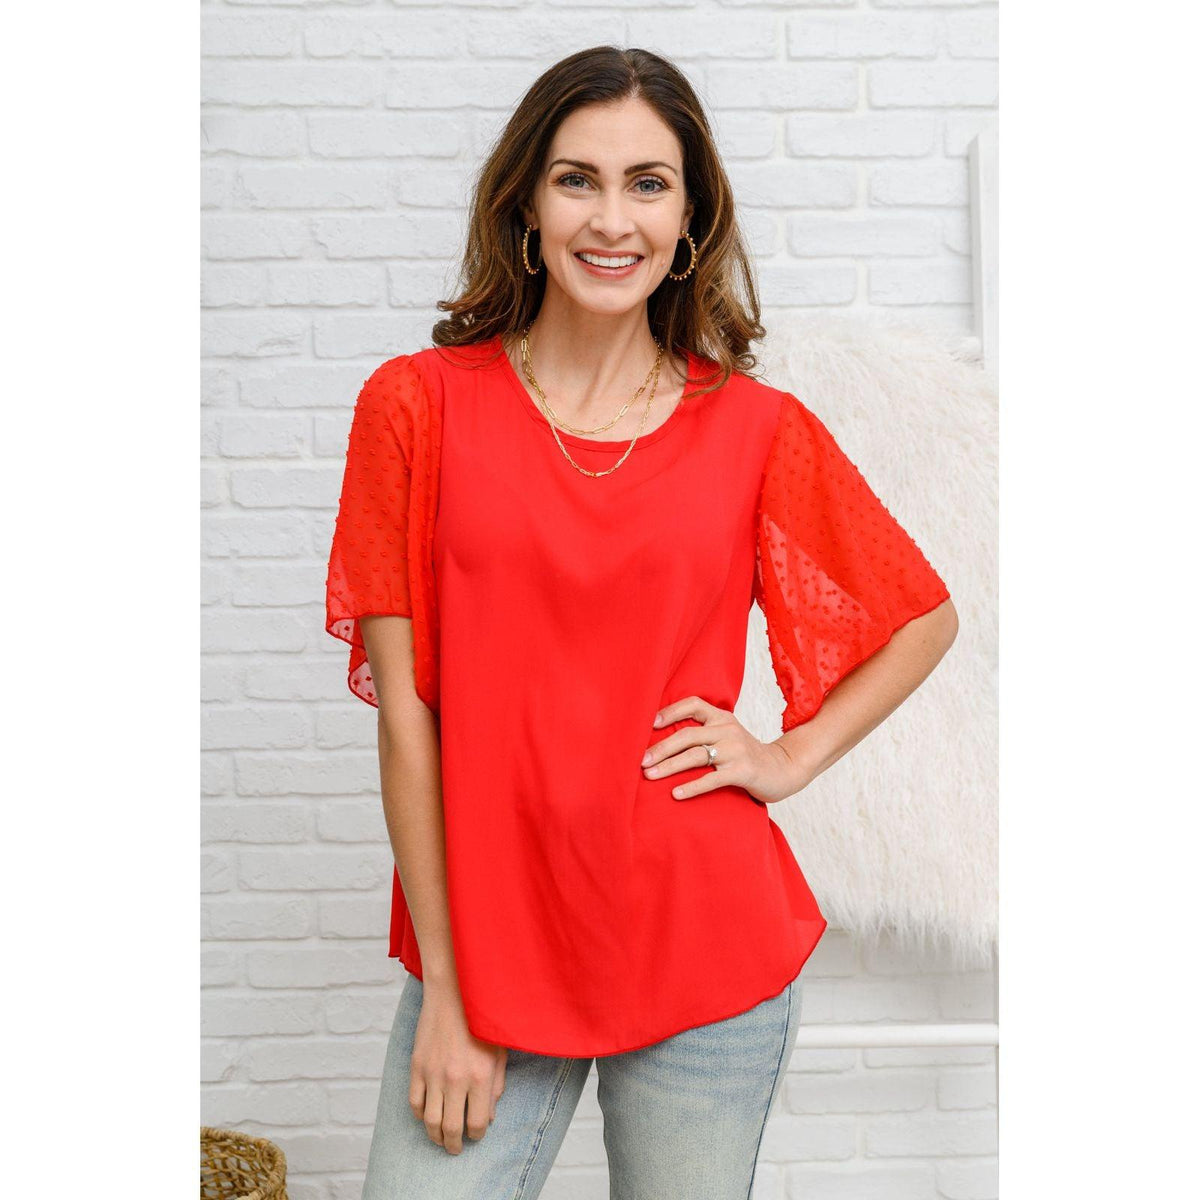 Best Of My Love Short Sleeve Blouse In Red - becauseofadi